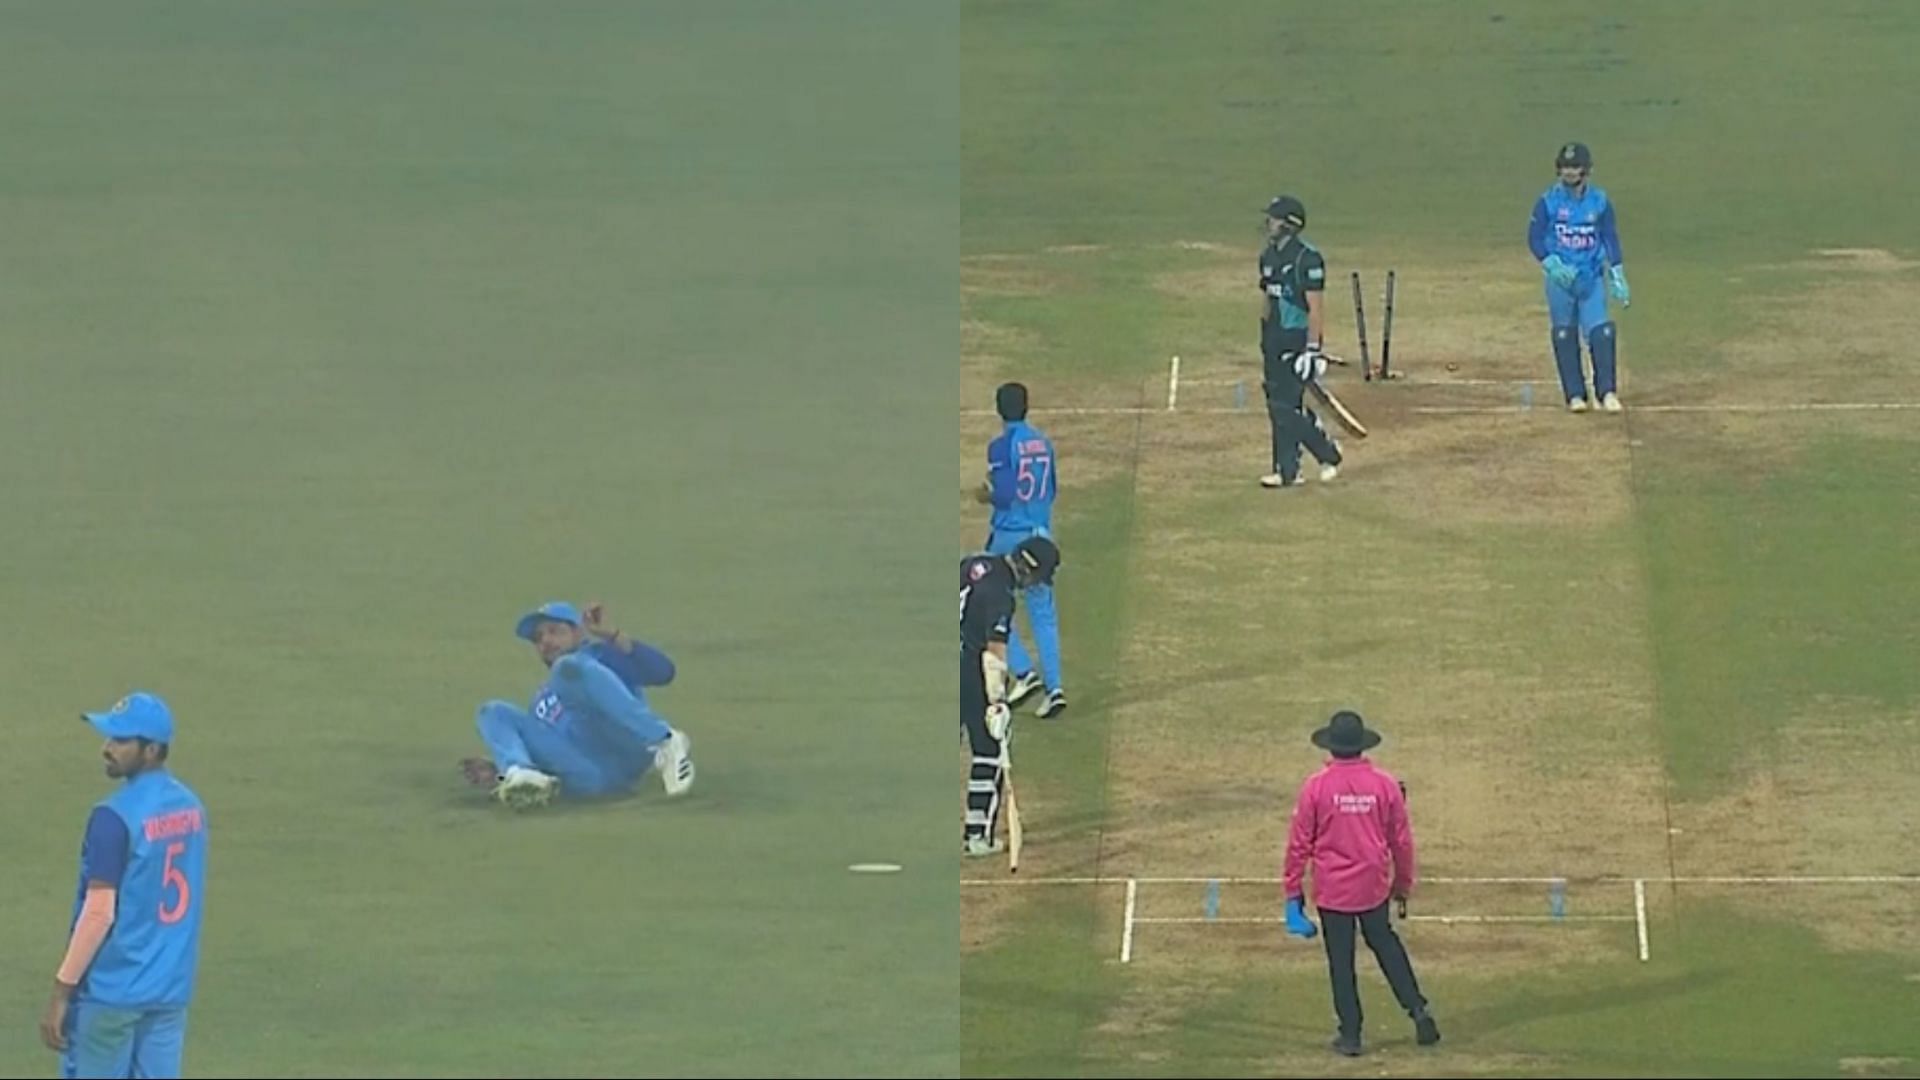 Mark Chapman got run out in the 13th over (Image: BCCI)